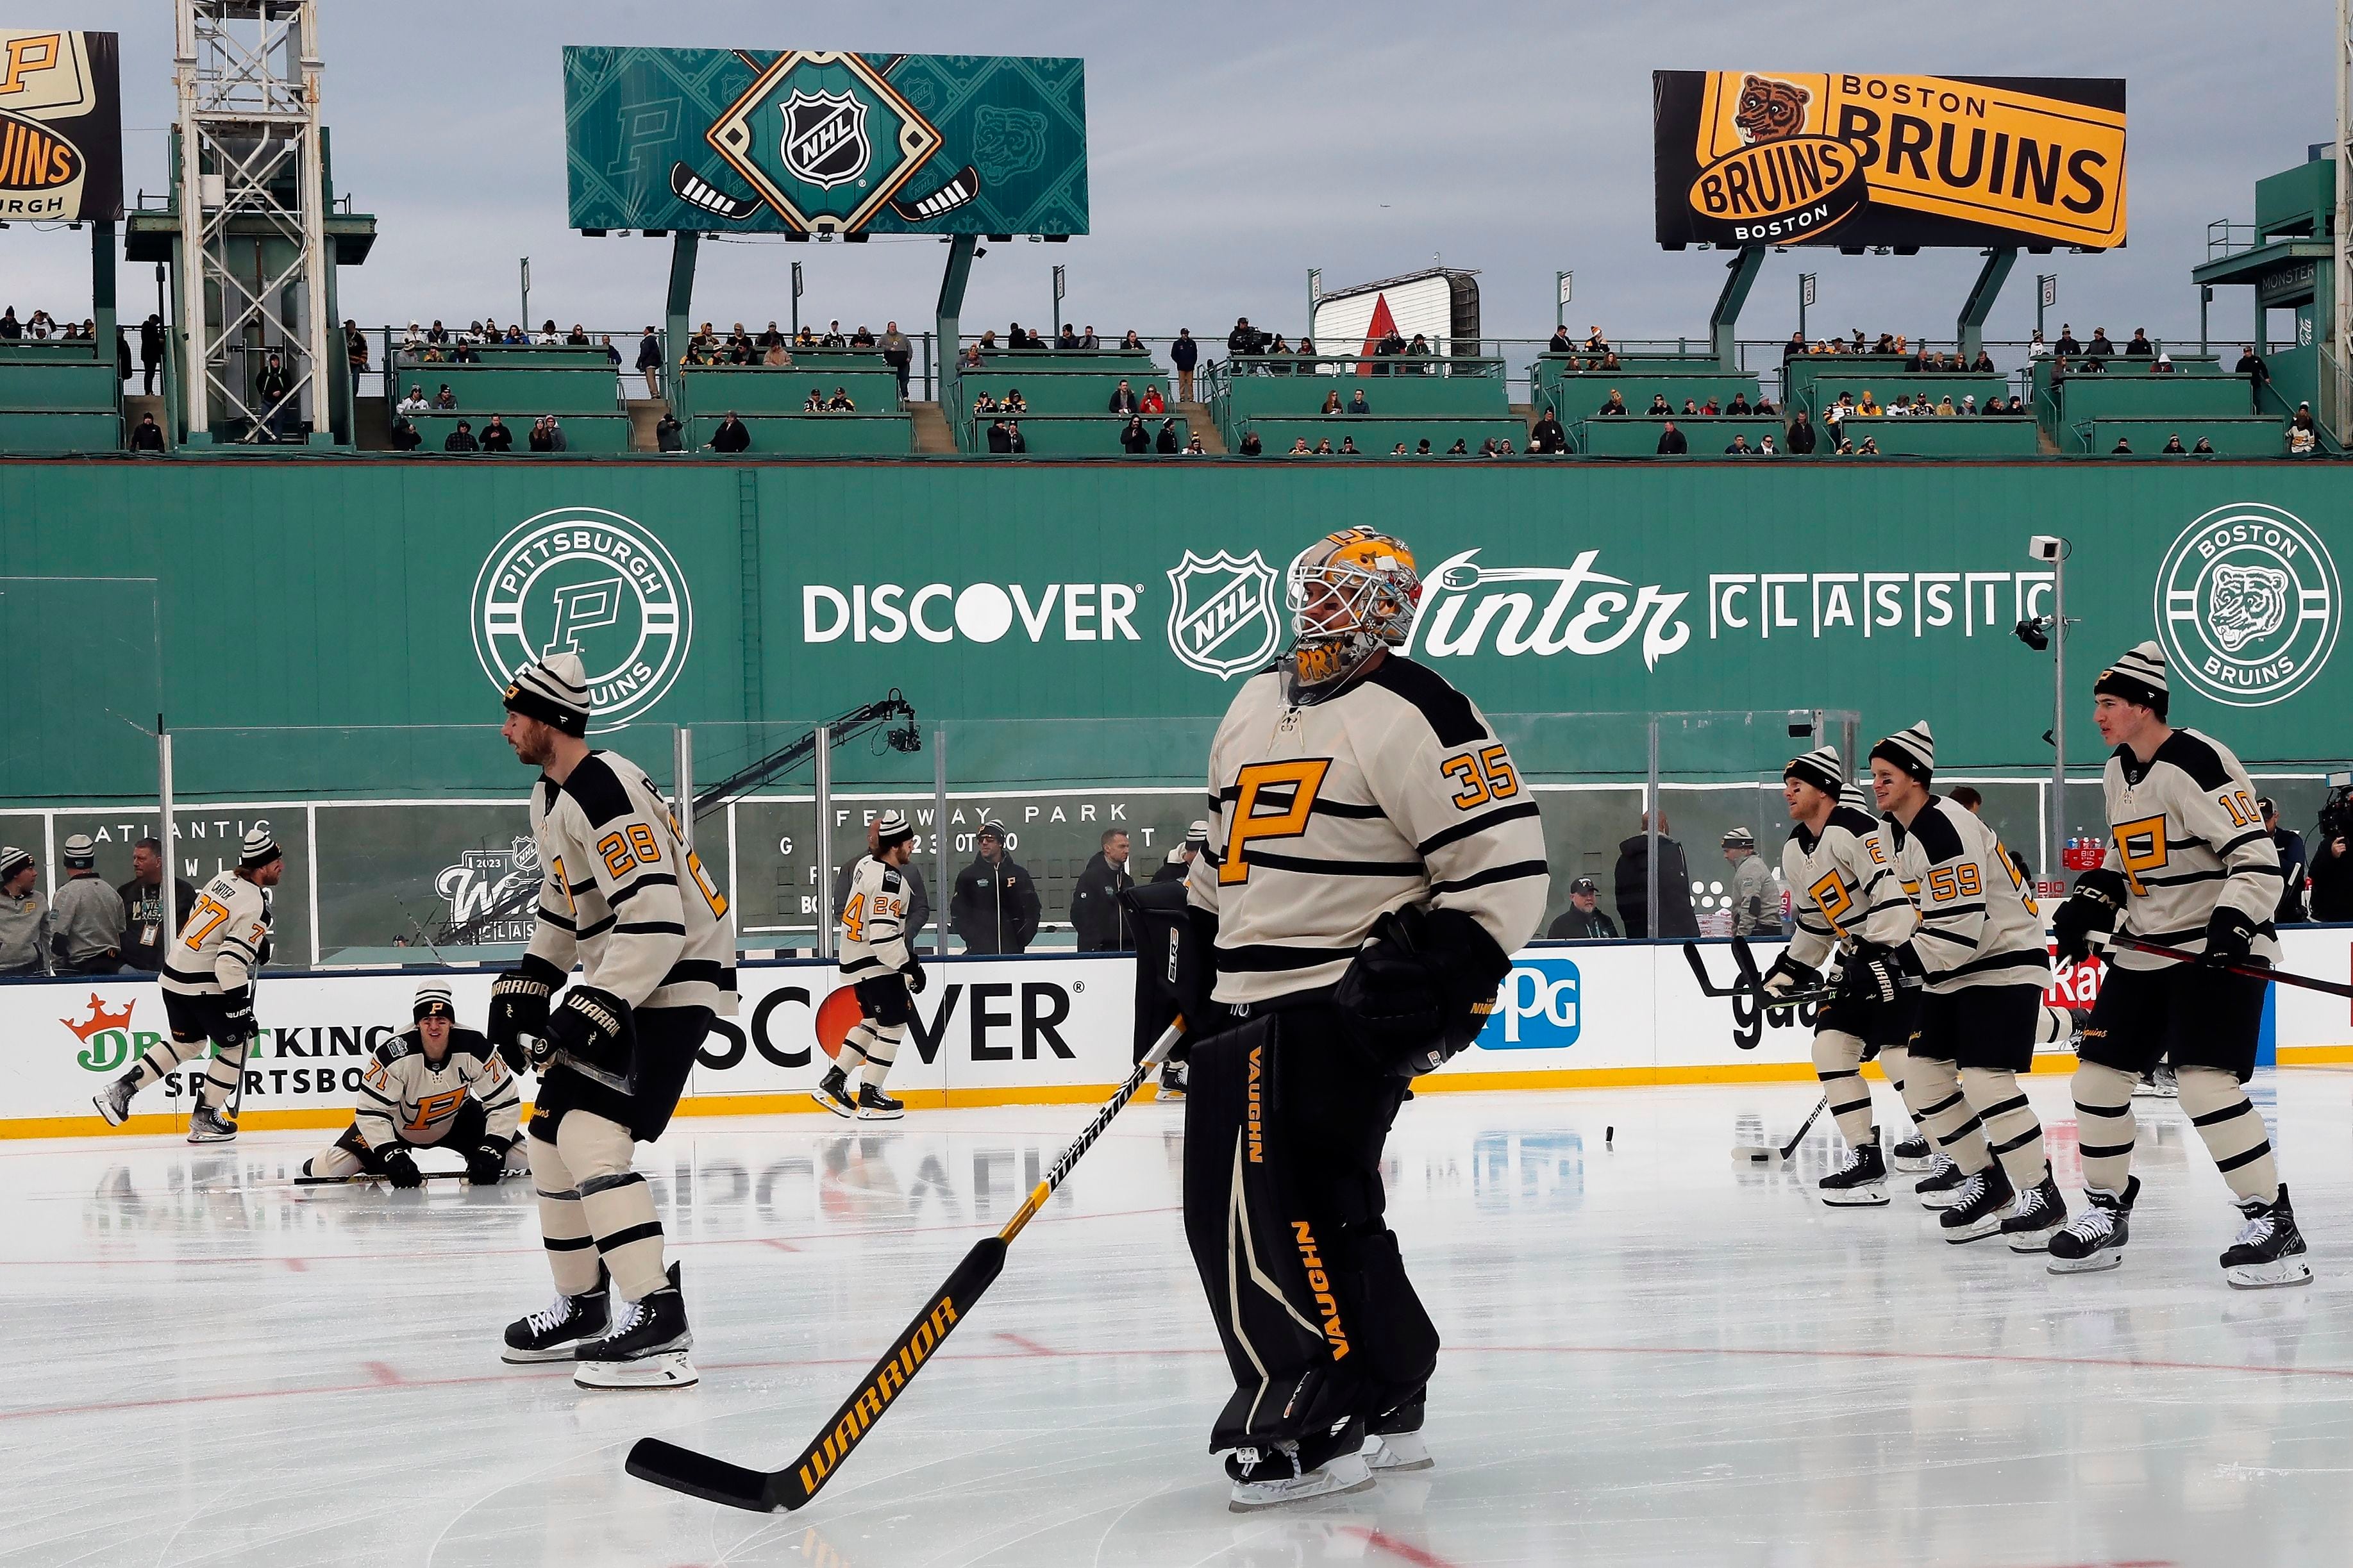 Hockey comes to Fenway as Bruins take on Penguins in Winter Classic